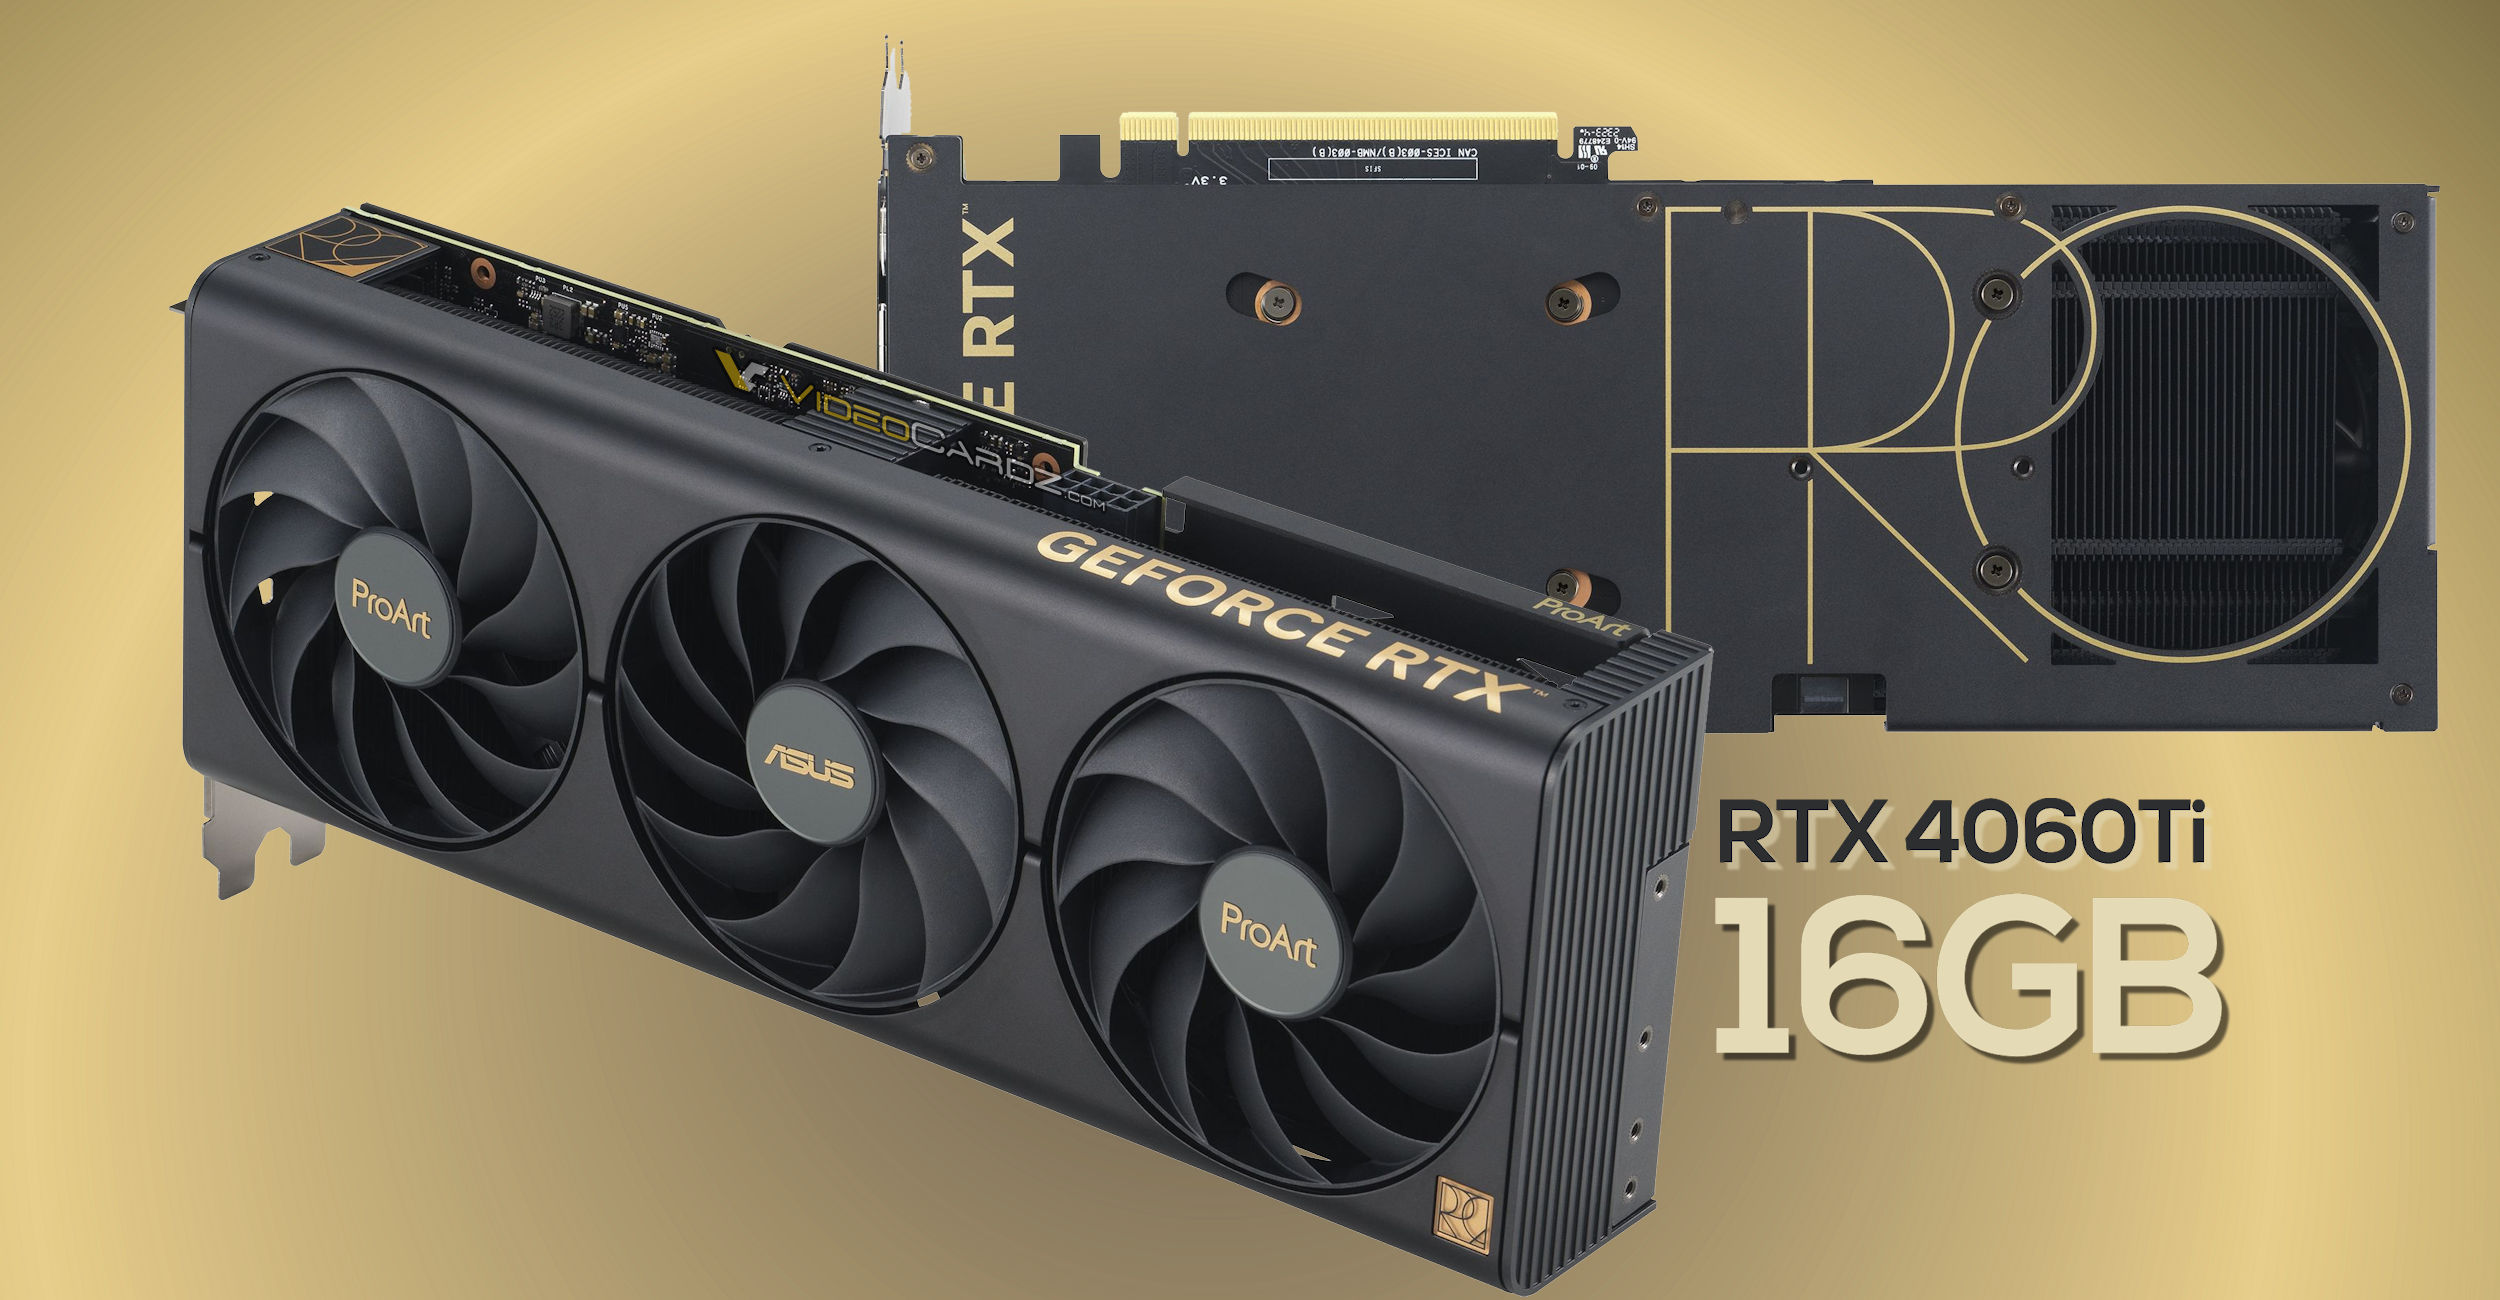 Get an extra helping of VRAM with GeForce RTX 4060 Ti 16GB